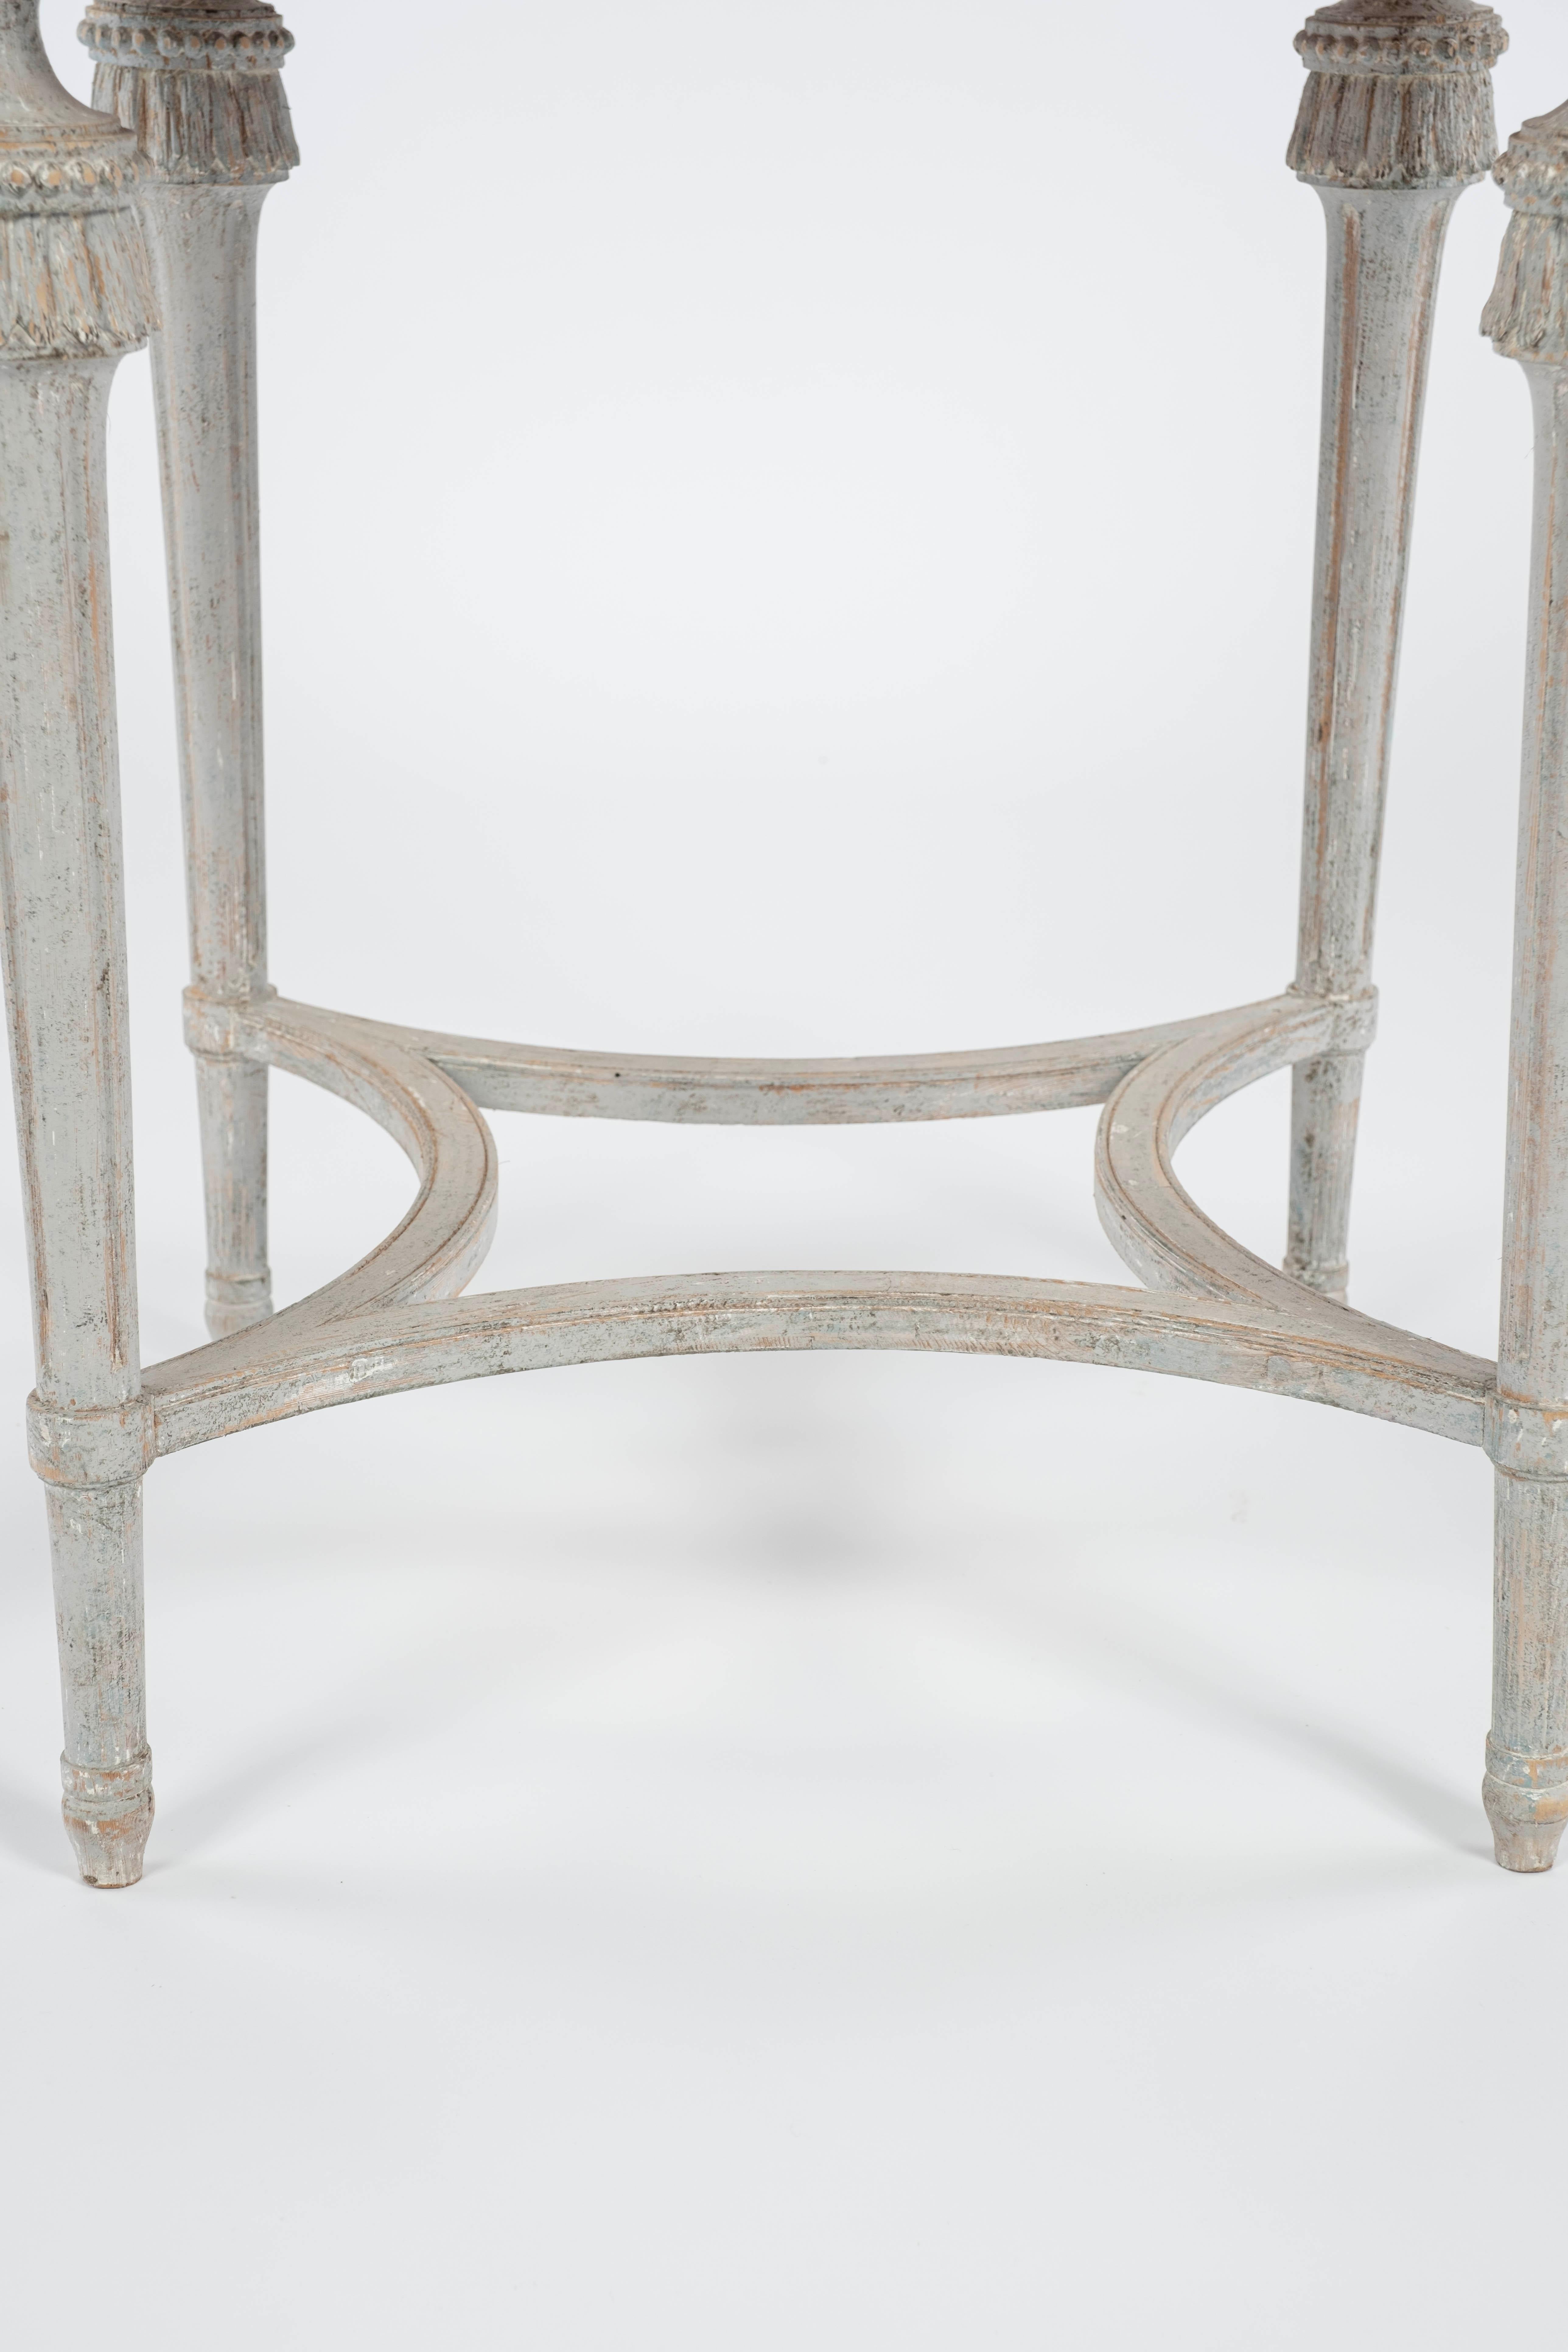 19th C. Gustavian Round Table For Sale 2